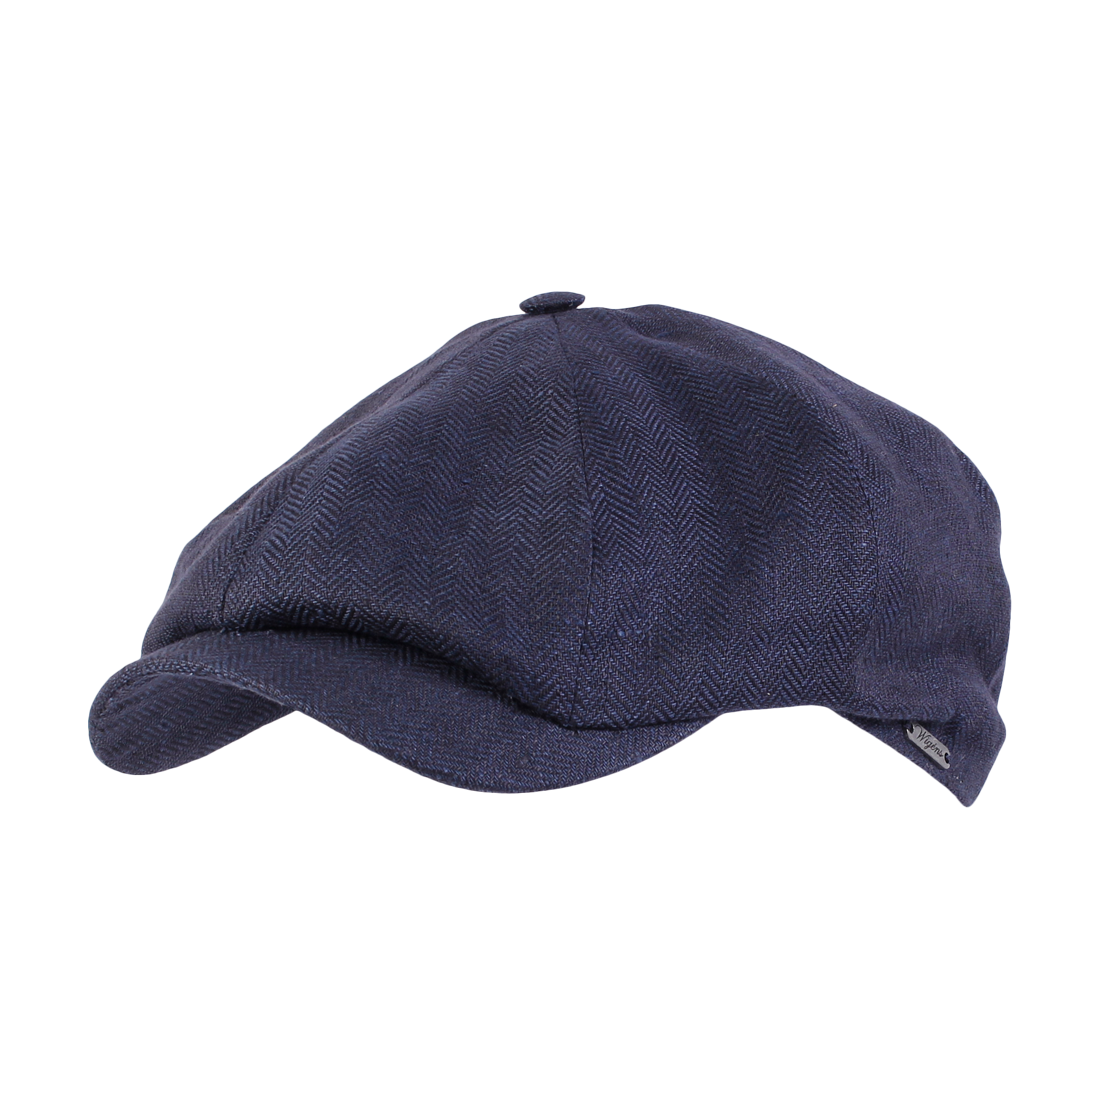 Newsboy Classic Cap in Classic Linen Herringbone (Choice of Colors) by Wigens